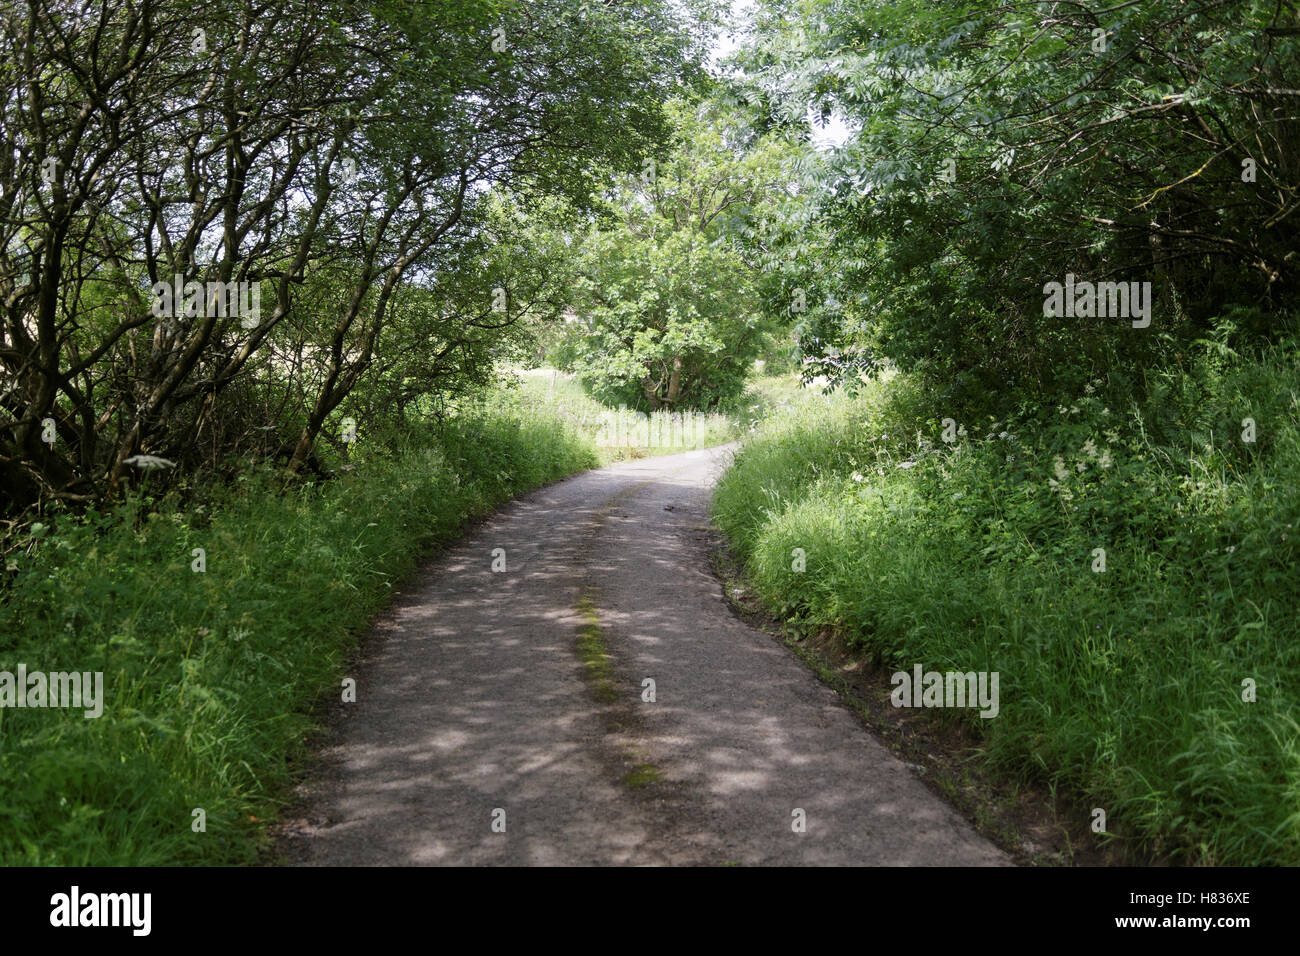 Country path with trees on either side and distant view Stock Photo